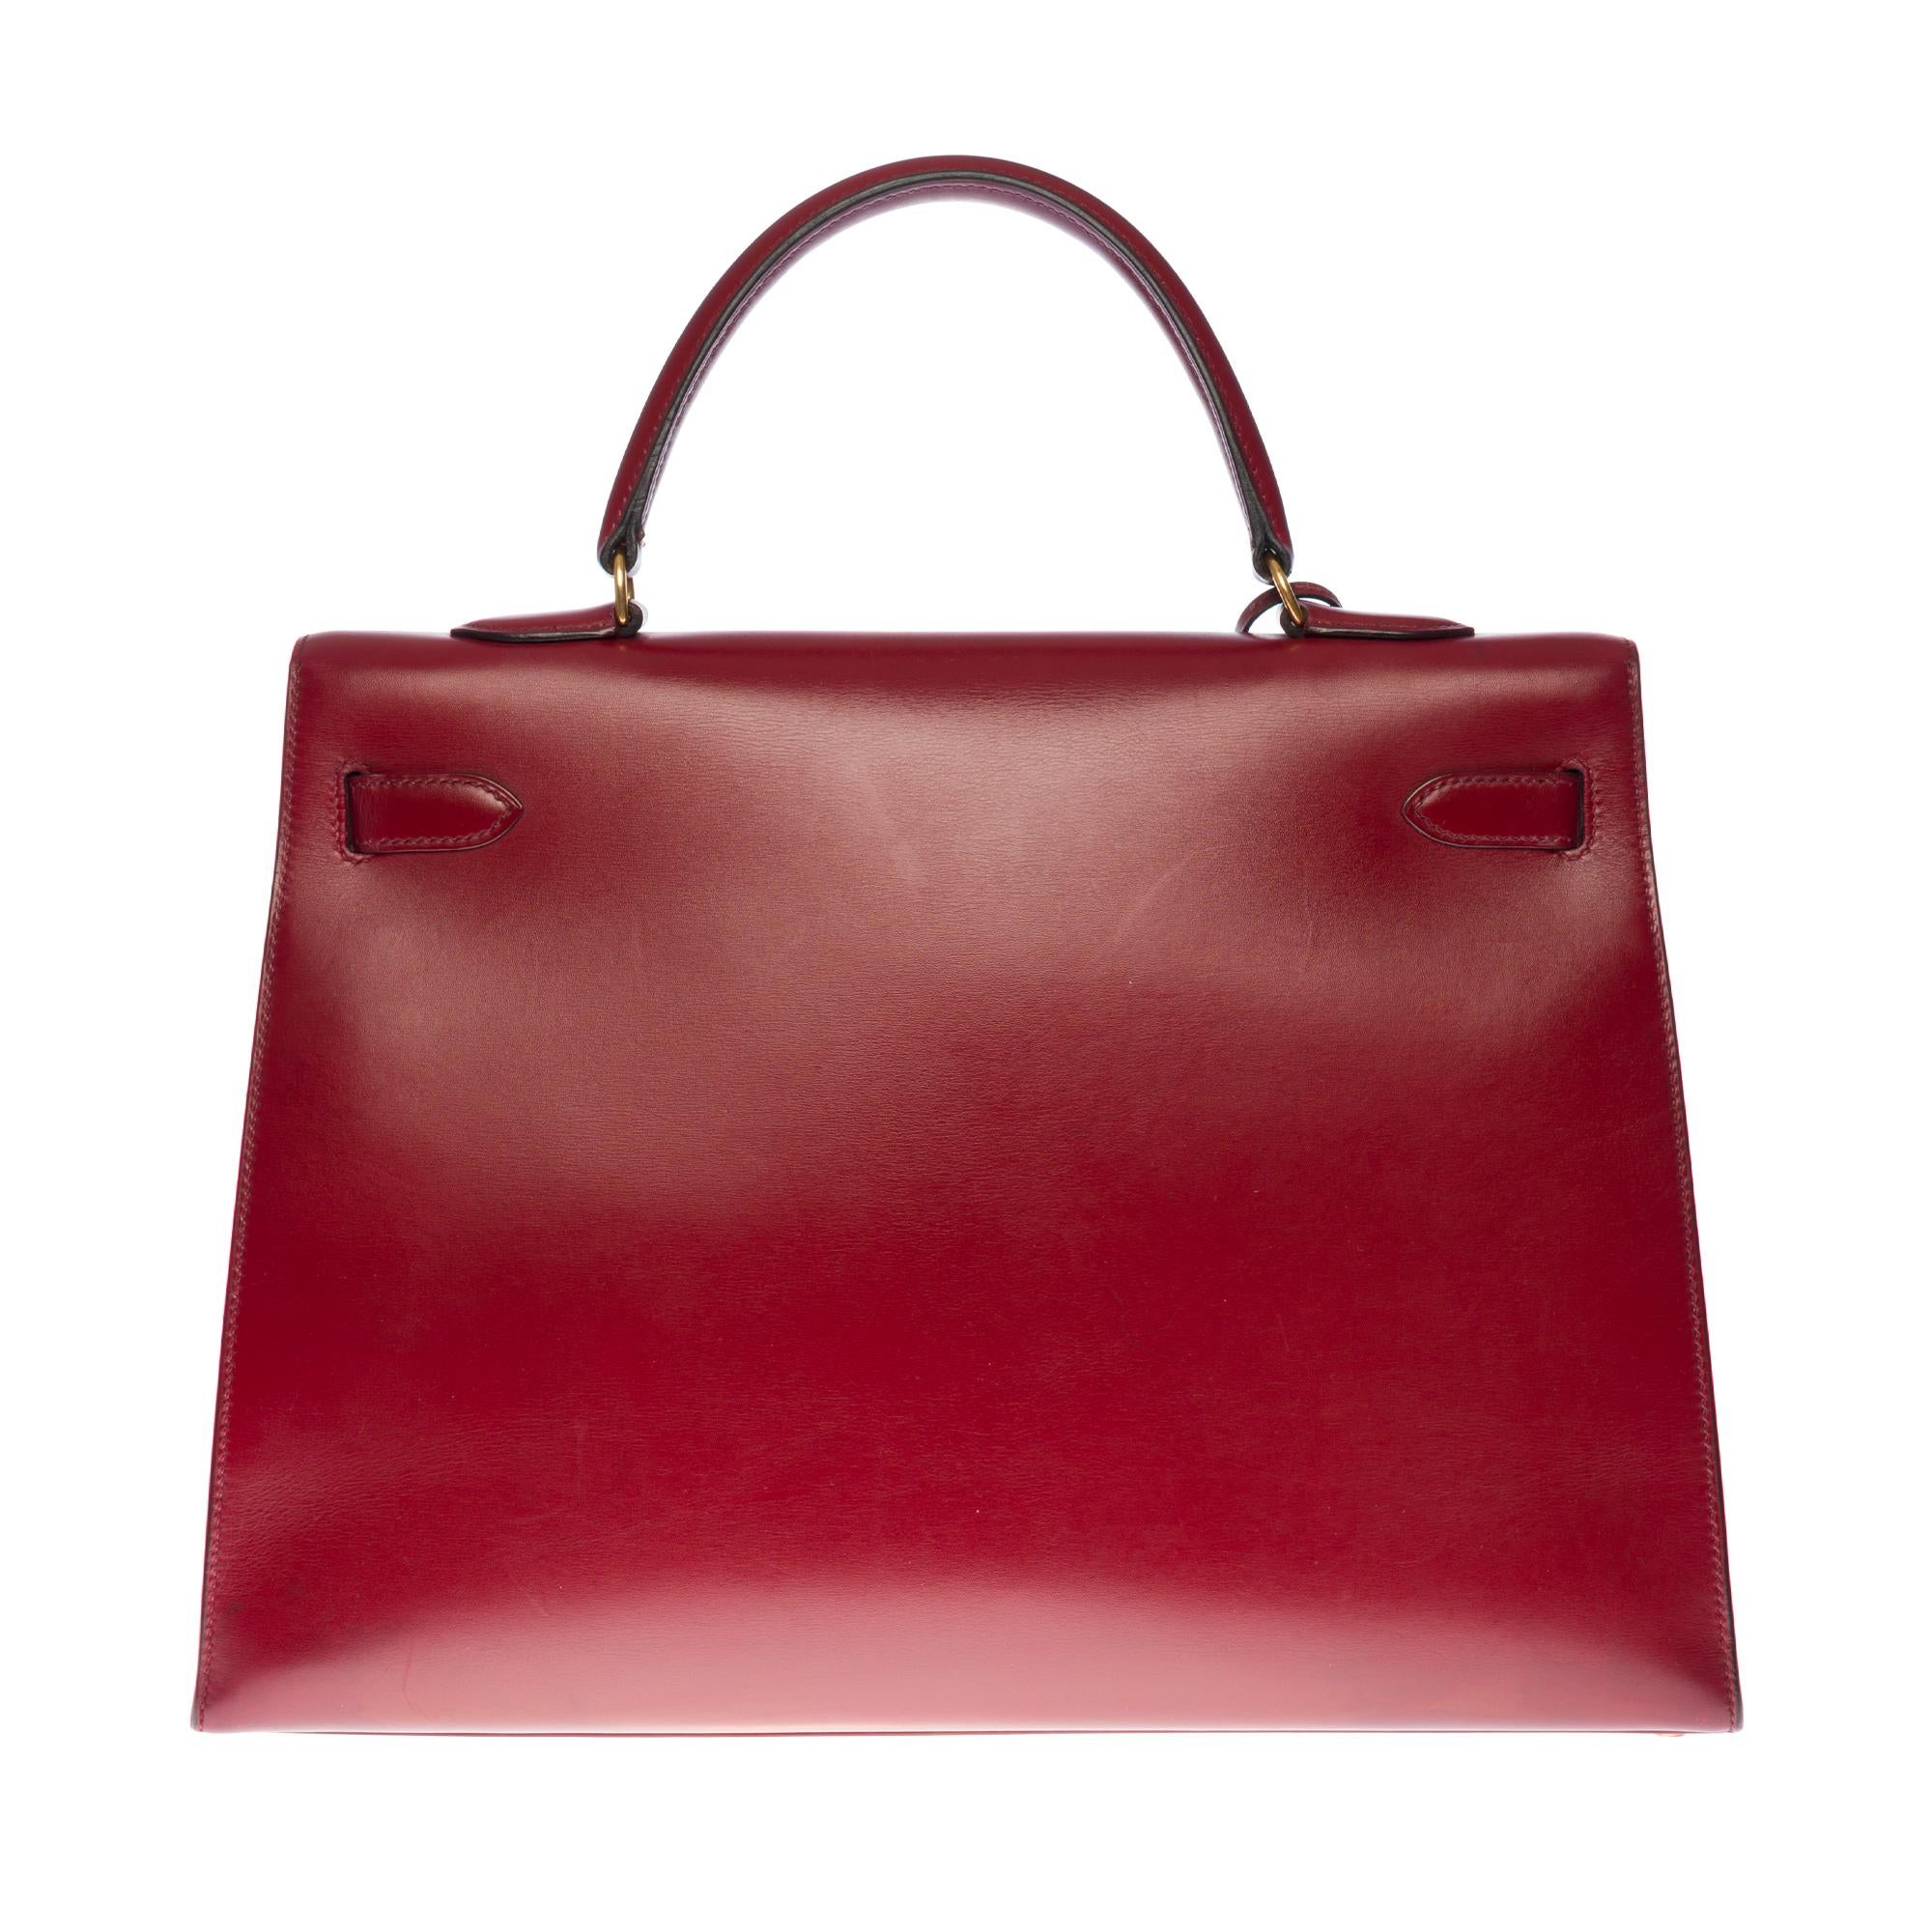 Stunning Hermes Kelly 35 cm sellier in burgundy calf box leather shoulder strap (Red H), gold-plated metal hardware, removable burgundy leather shoulder strap, simple burgundy leather handle allowing a hand or shoulder strap .
Closure by